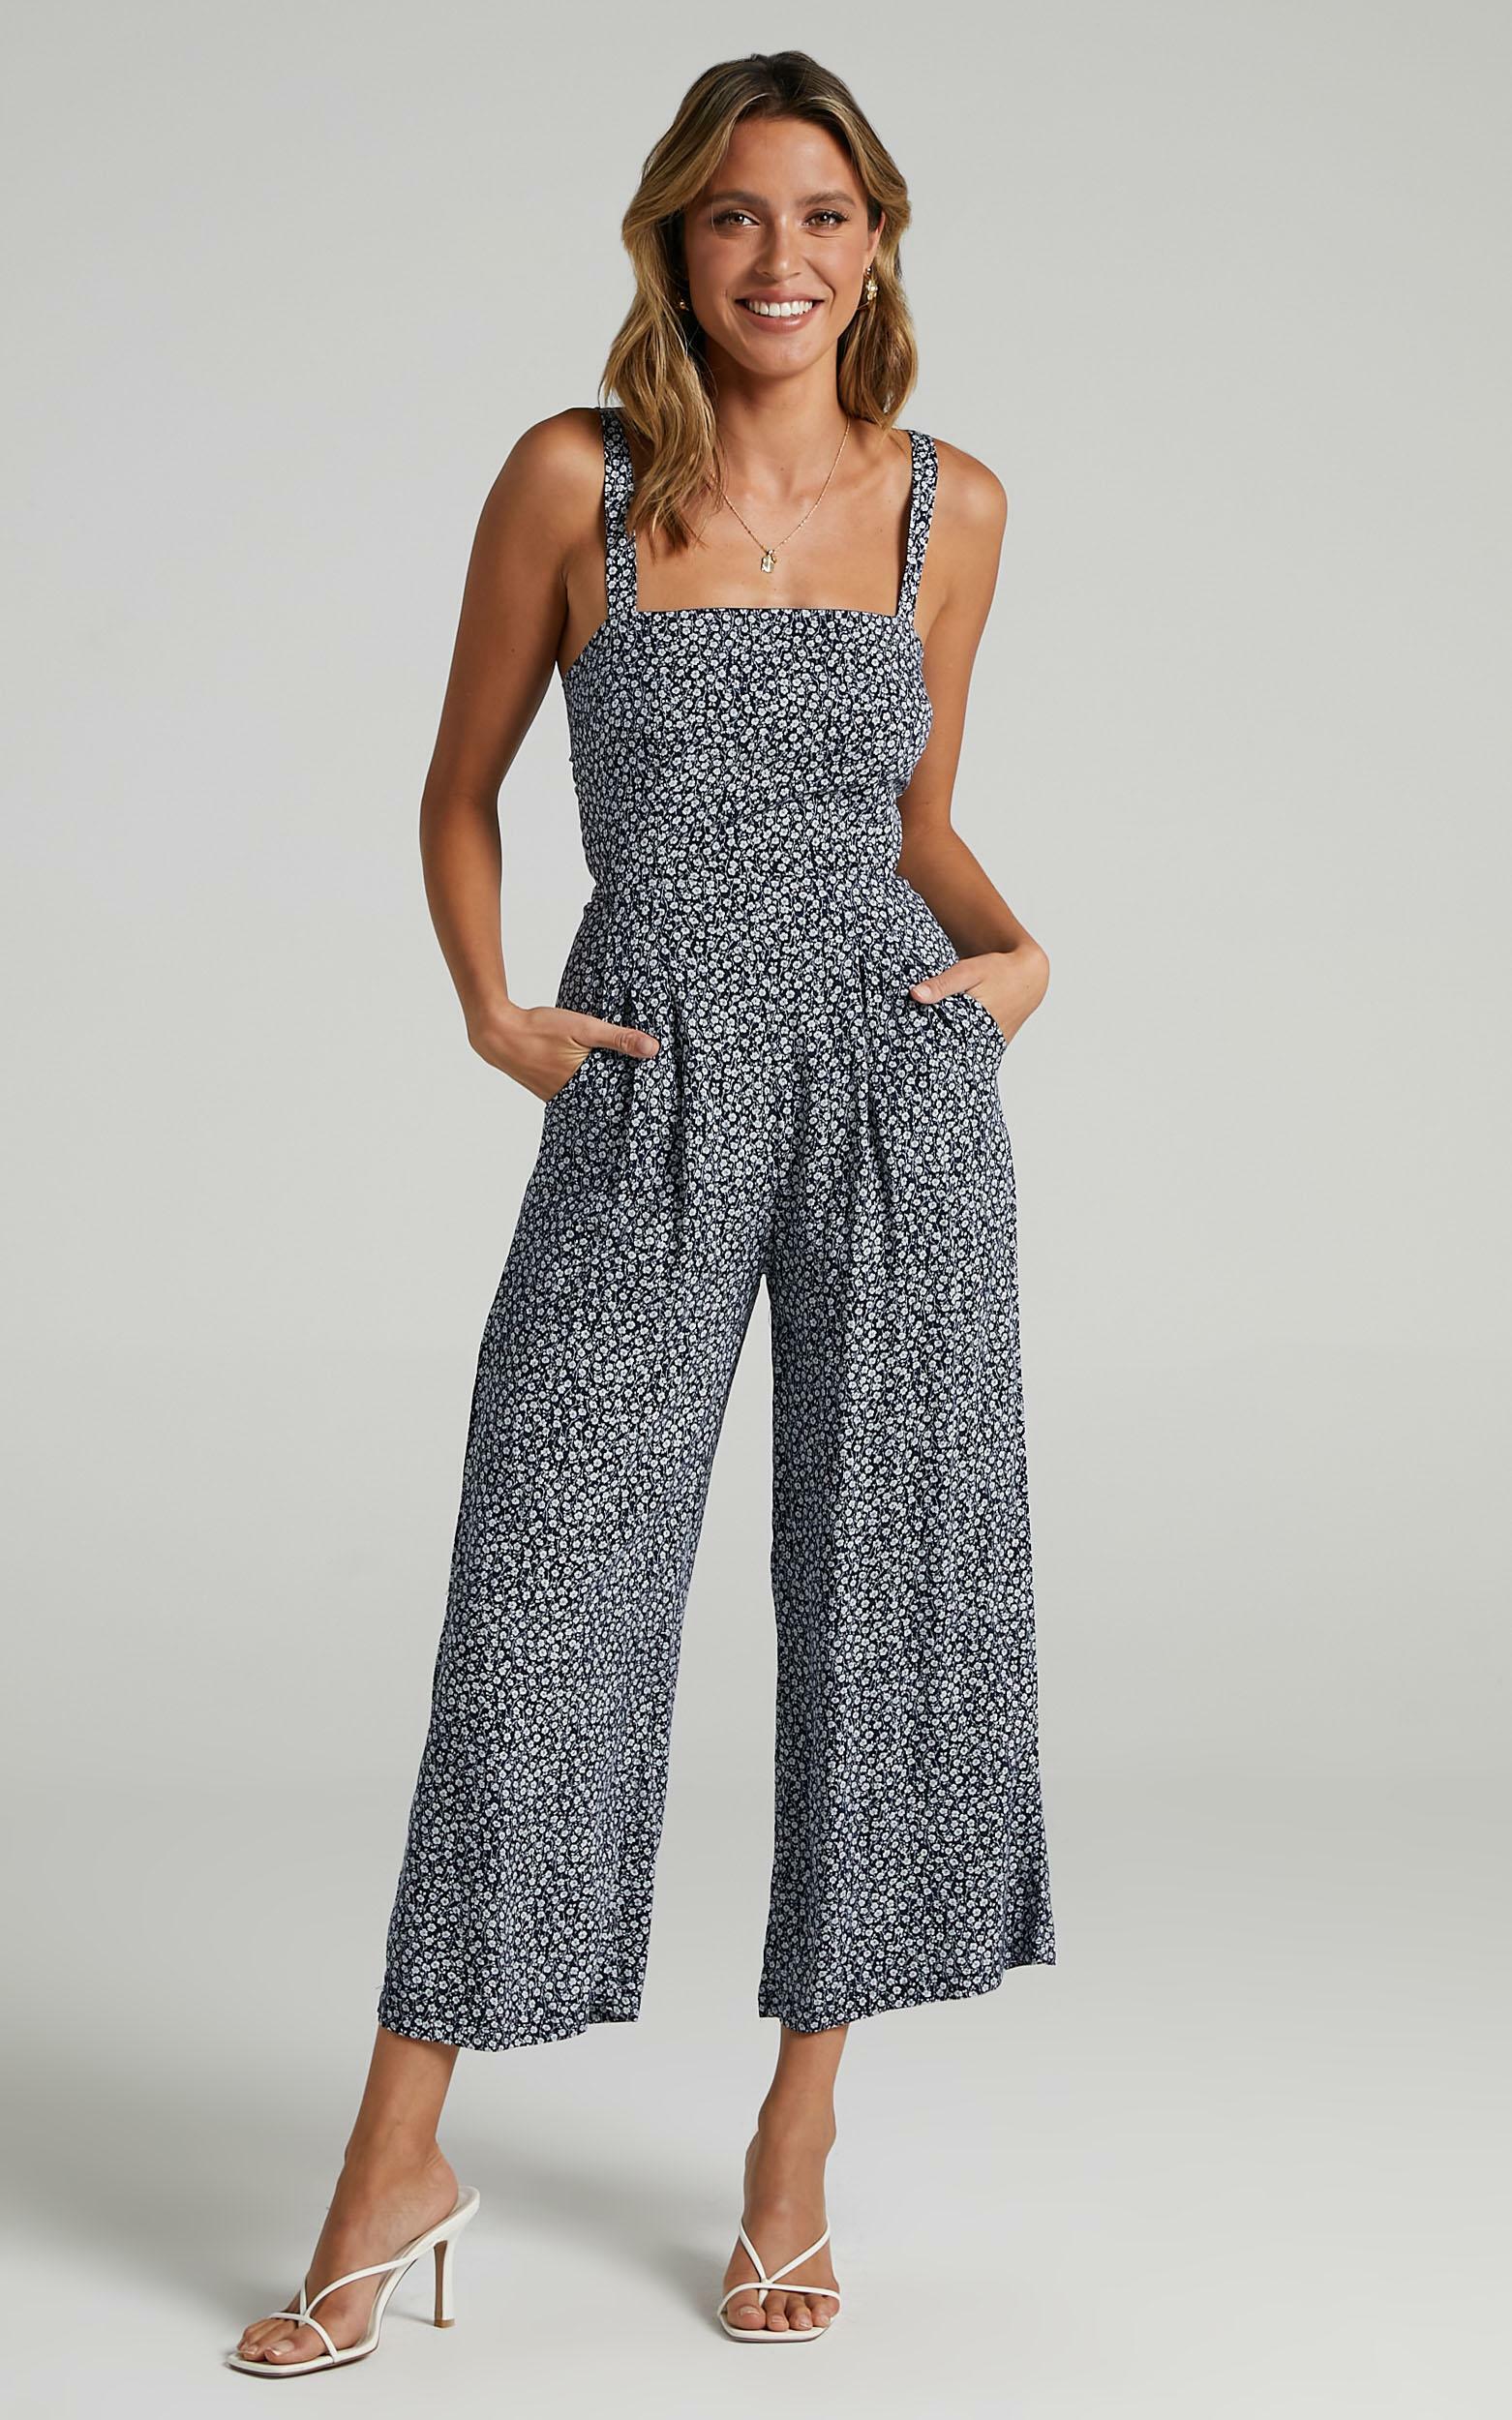 Life On The Road Jumpsuit in Navy Floral - 06, NVY3, hi-res image number null